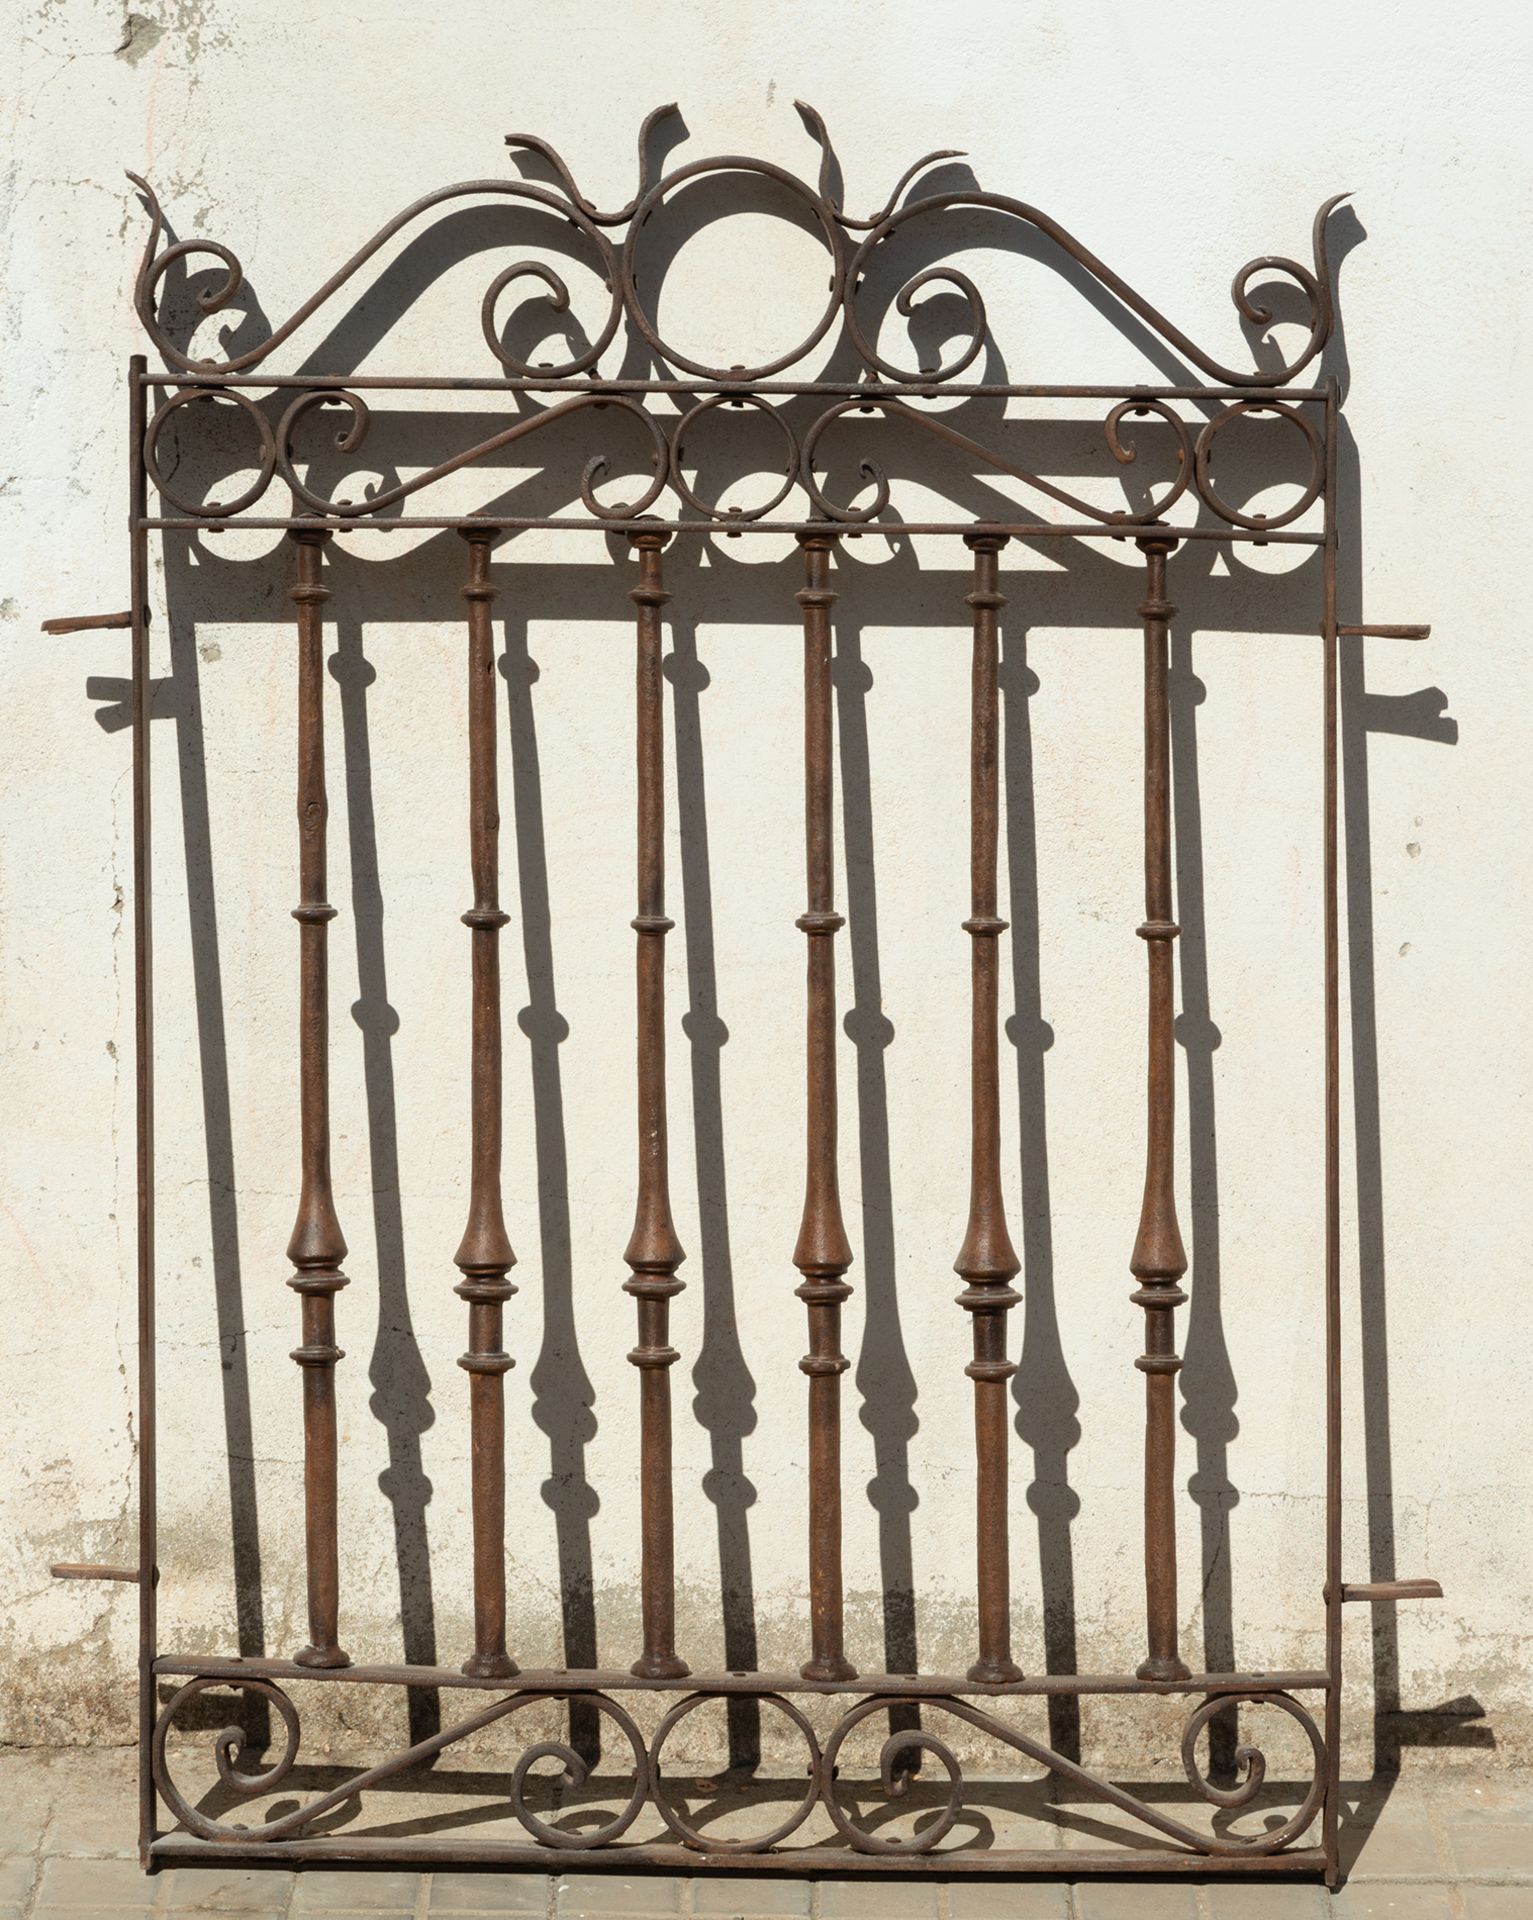 Wrought iron grill for window, 19th century